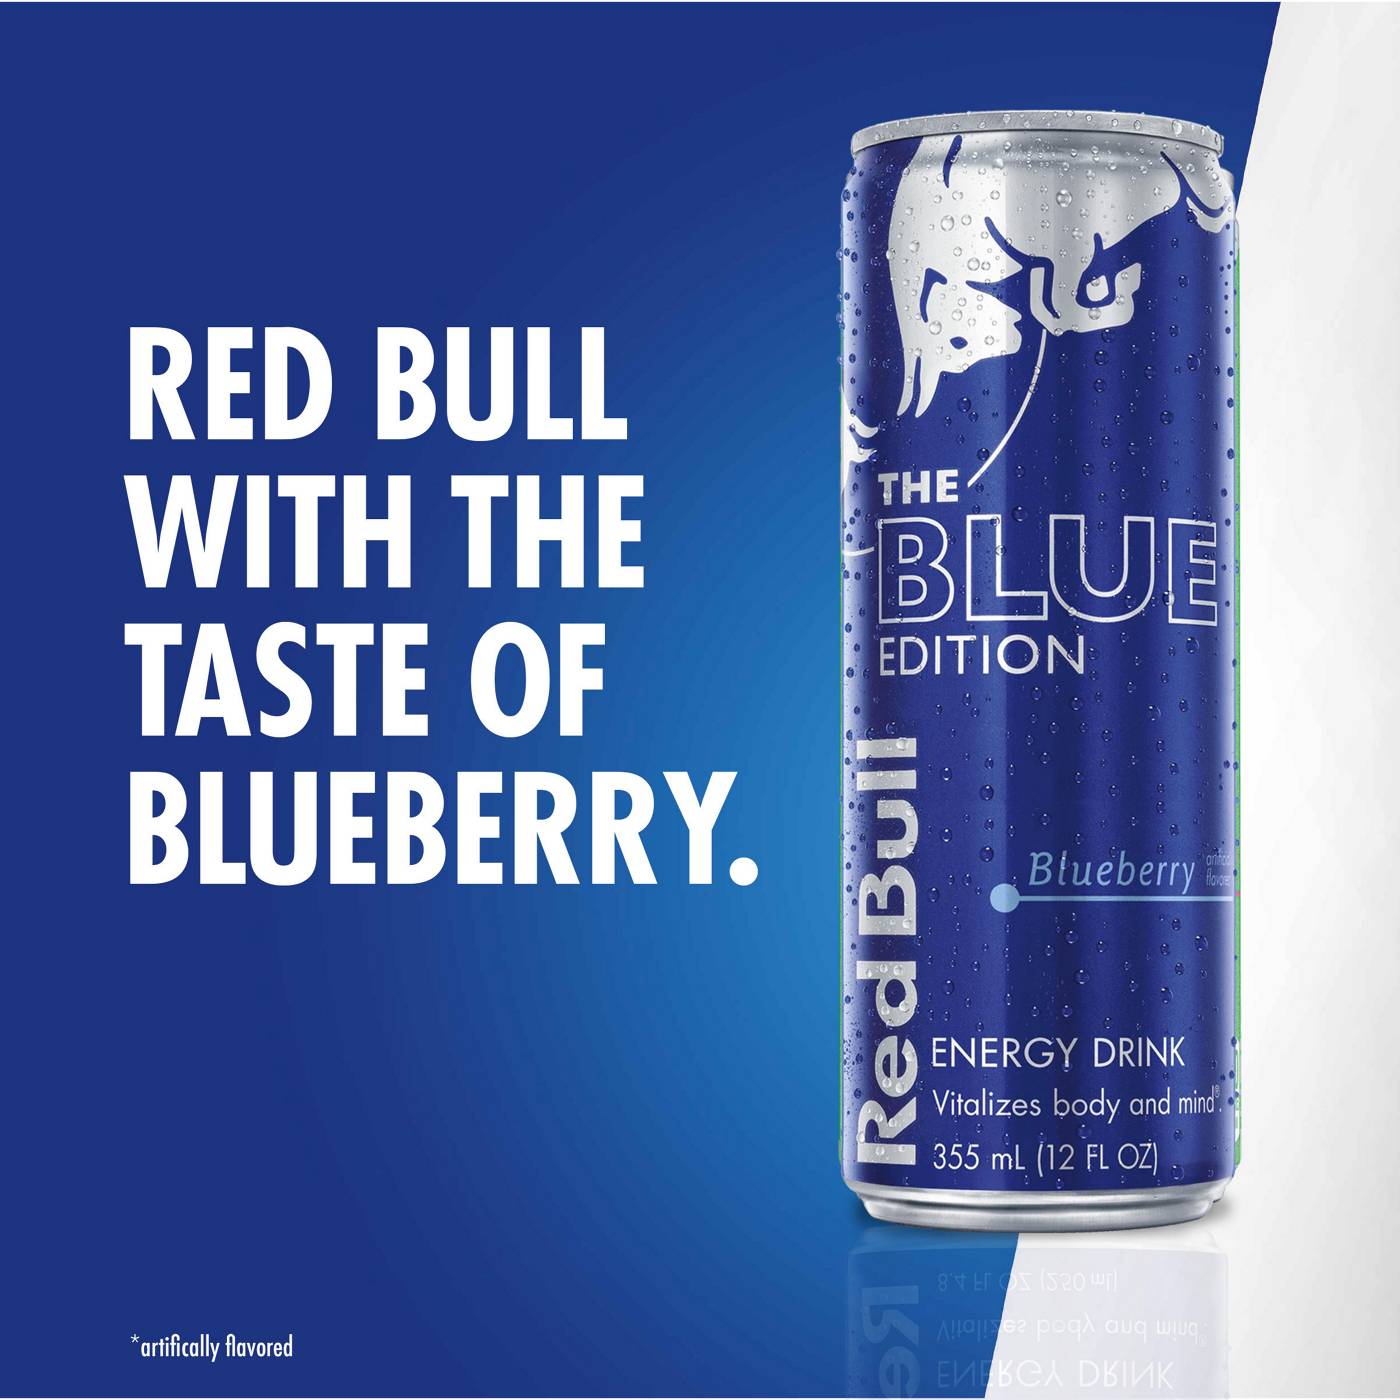 Red Bull The Blue Edition Blueberry Energy Drink; image 6 of 7